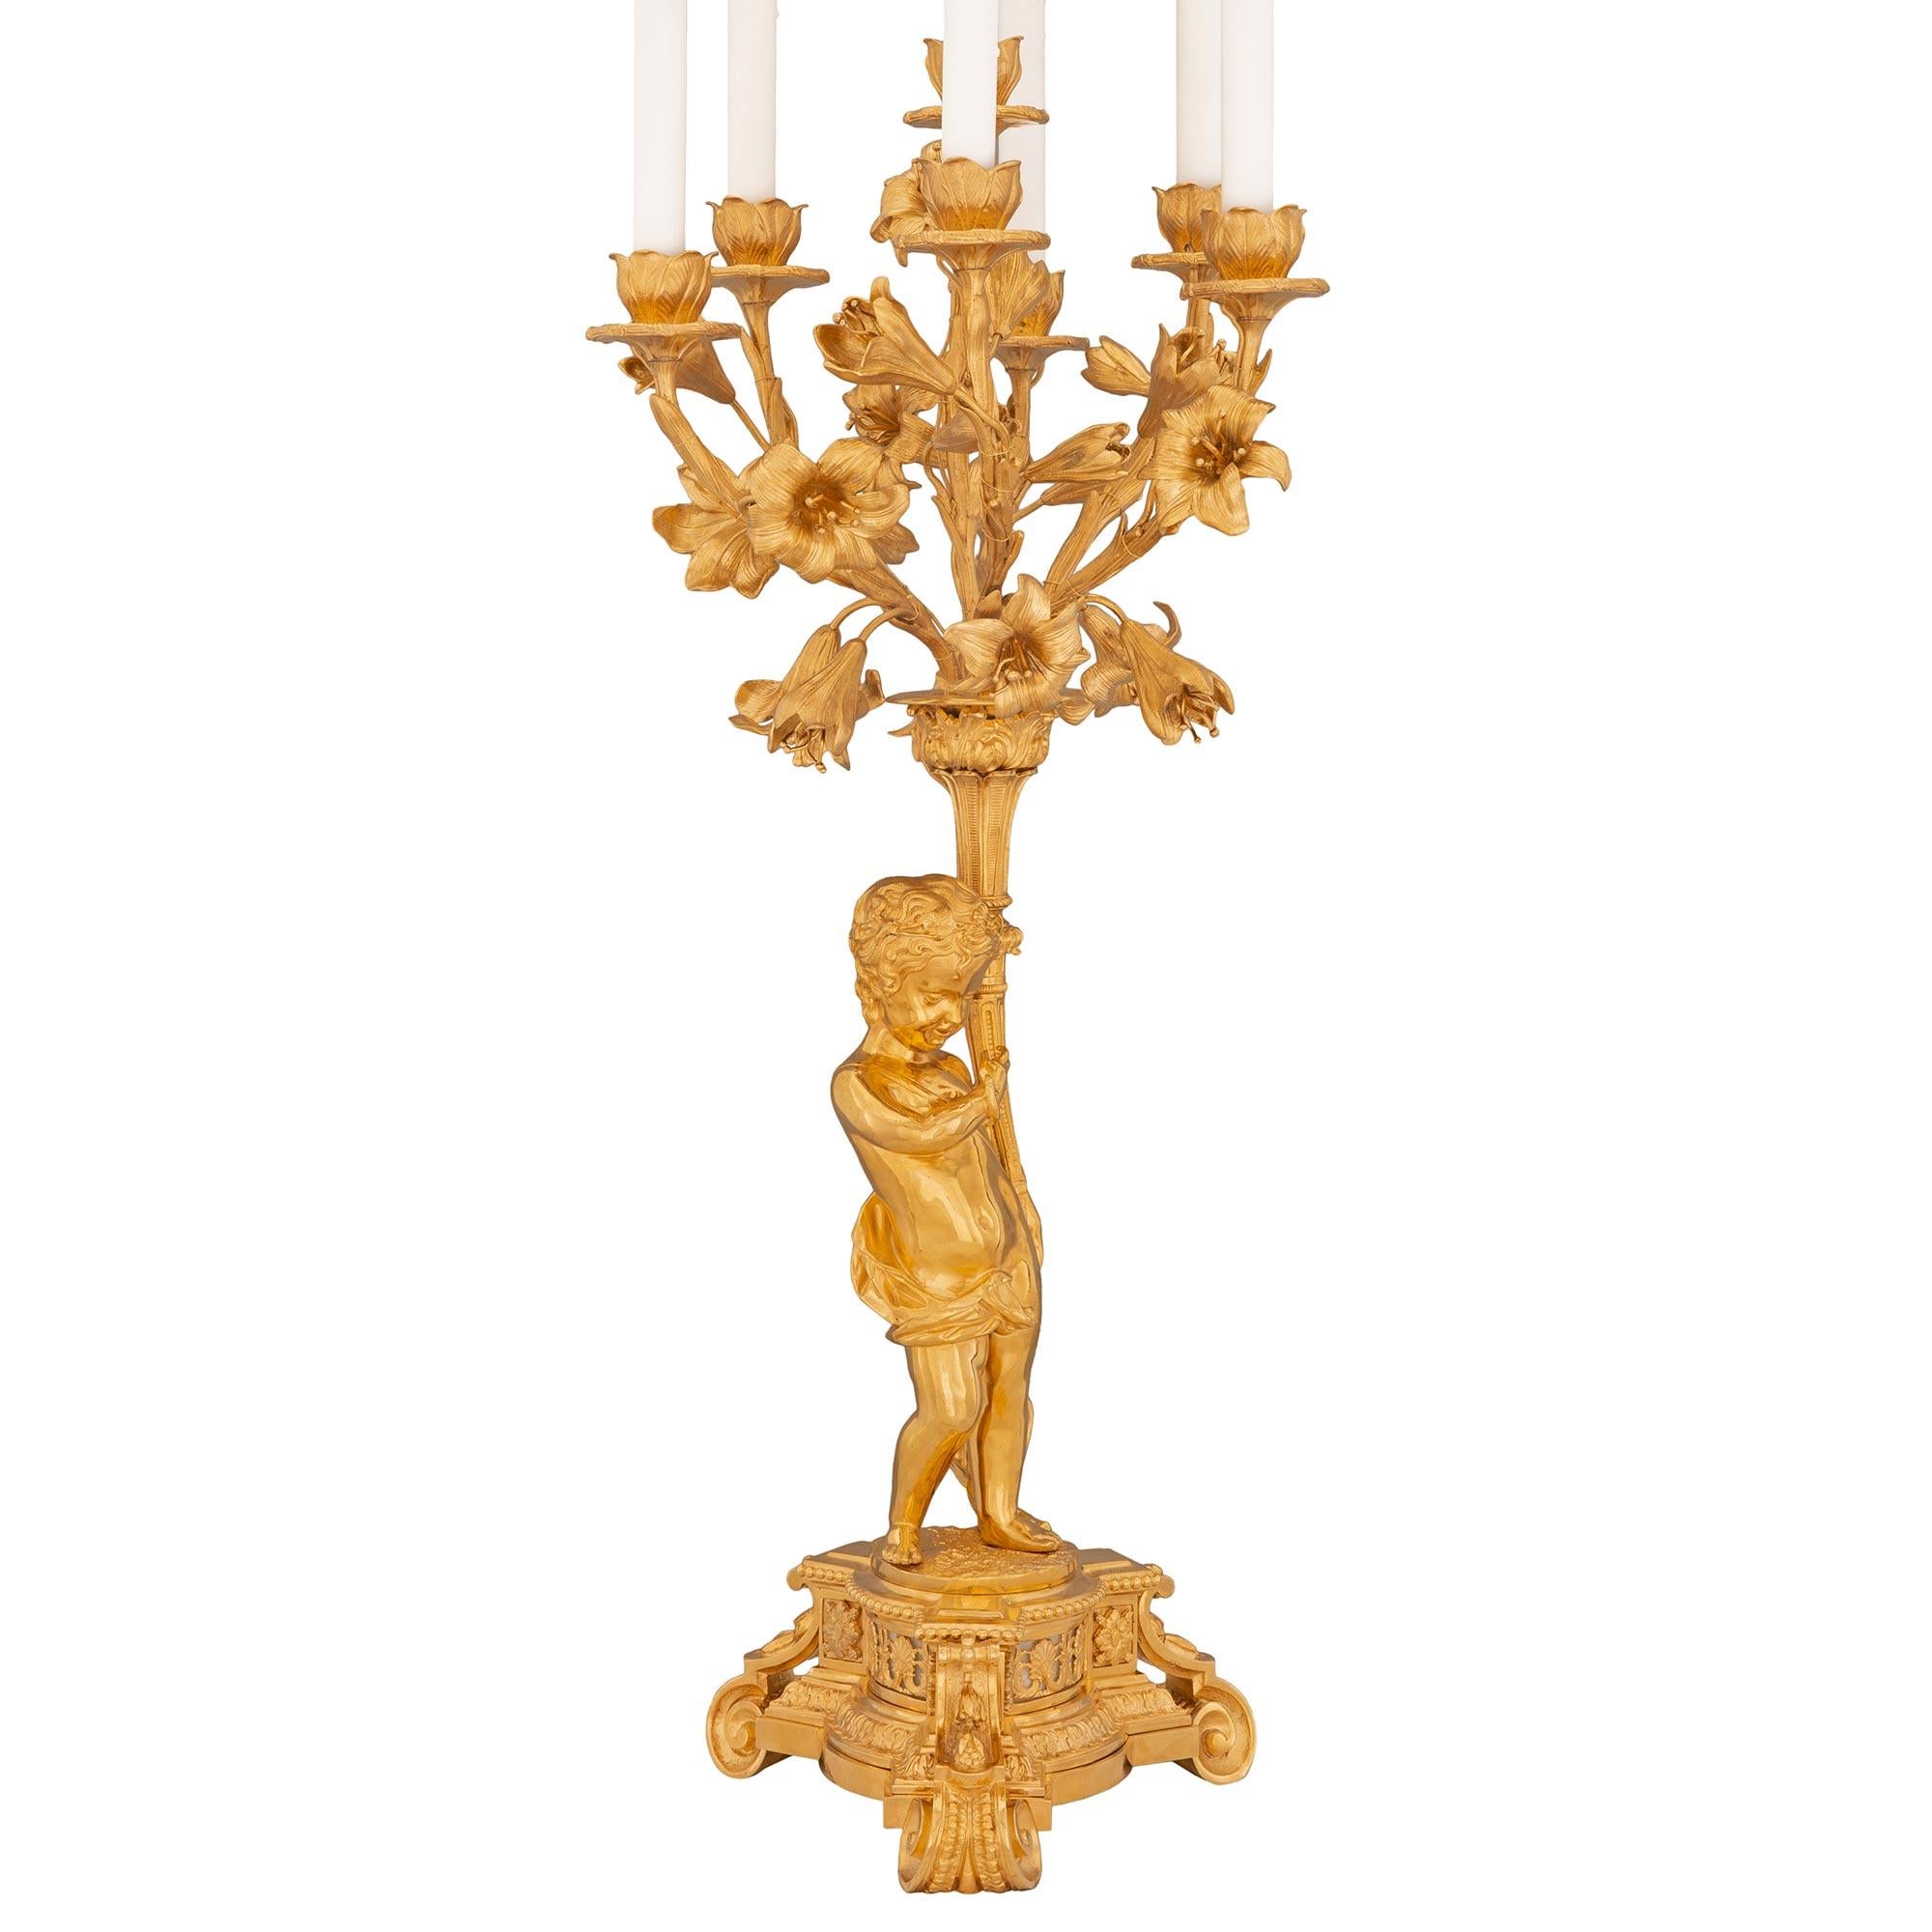 A striking large scale true pair of French 19th century Louis XVI st. Belle Époque period ormolu candelabra lamps. Each seven arm lamp is raised by an elegant triangular shaped base with concave sides and cut corners displaying superb most